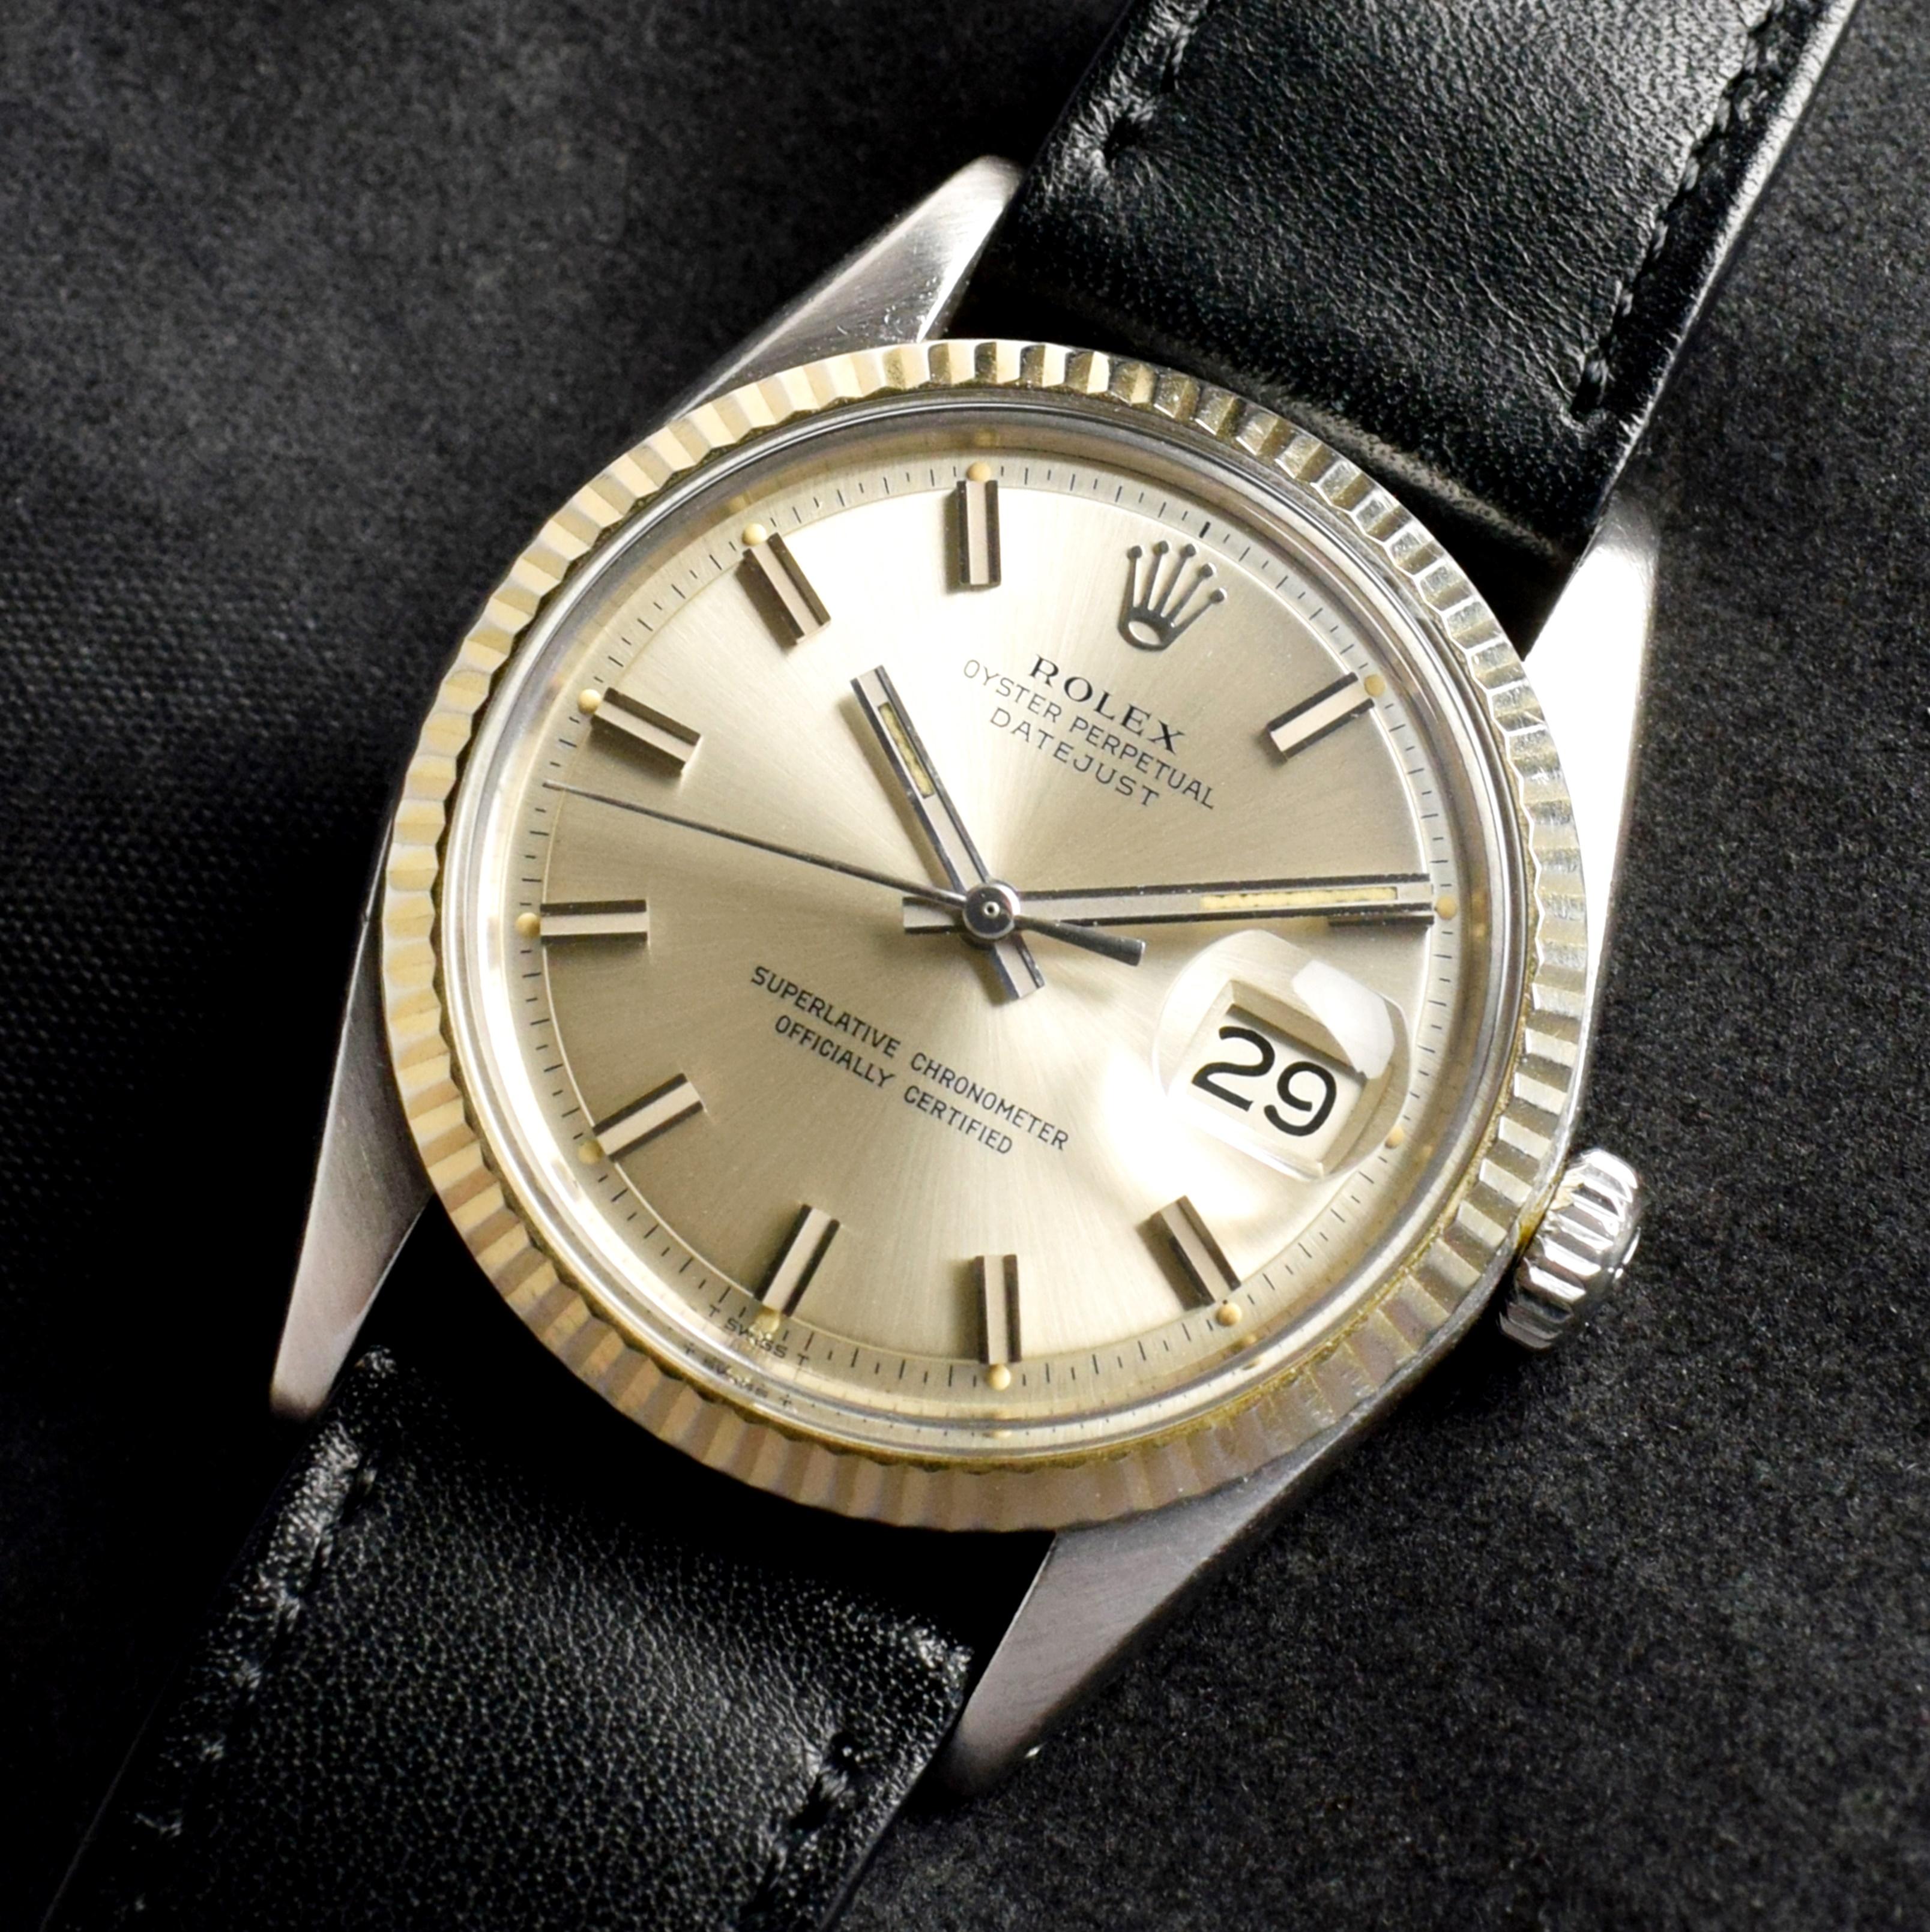 Brand: Vintage Rolex
Model: 1601
Year: 1972
Serial number: 35xxxxx
Reference: C03687
Case: 36mm without crown; Show sign of wear with slight polish from previous; inner case back stamped 1601
Dial: Excellent Clean Condition Silver Wideboy Dial with